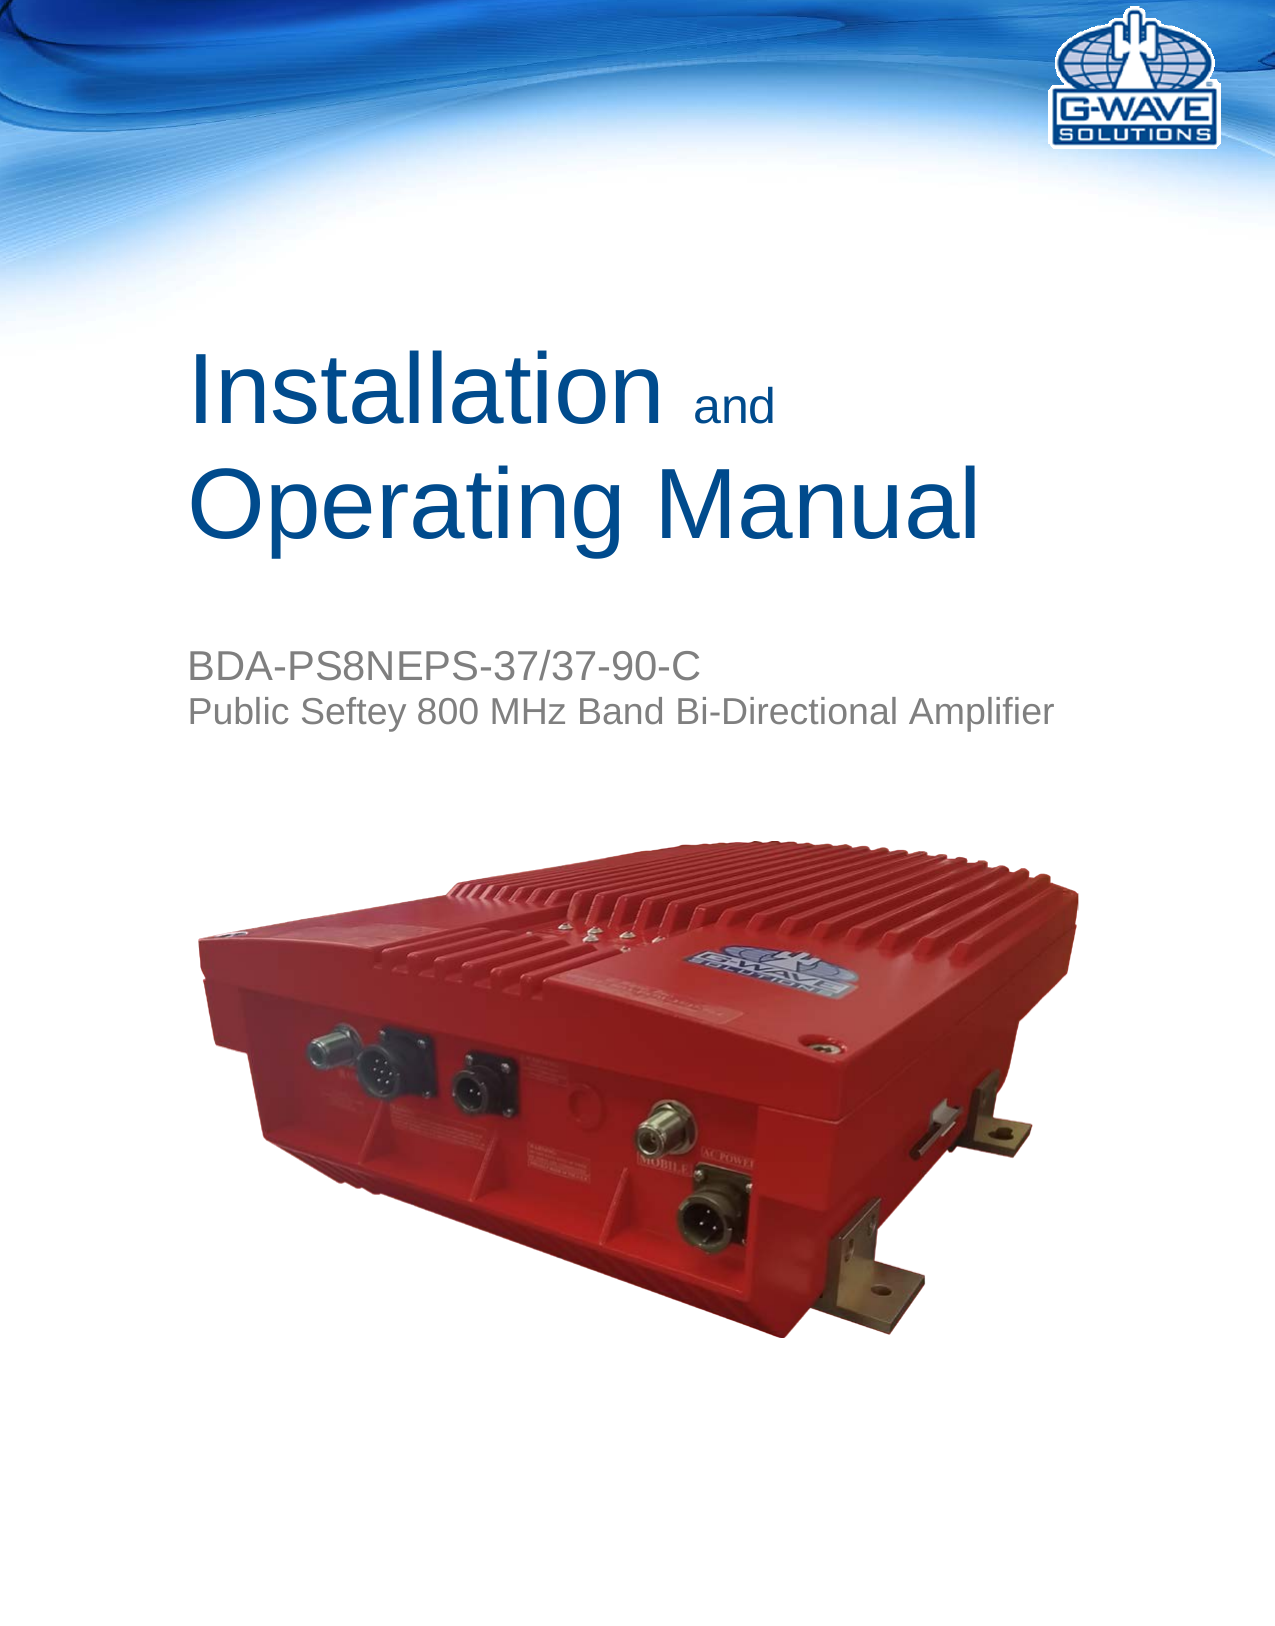       Installation and Operating Manual    BDA-PS8NEPS-37/37-90-C Public Seftey 800 MHz Band Bi-Directional Amplifier    